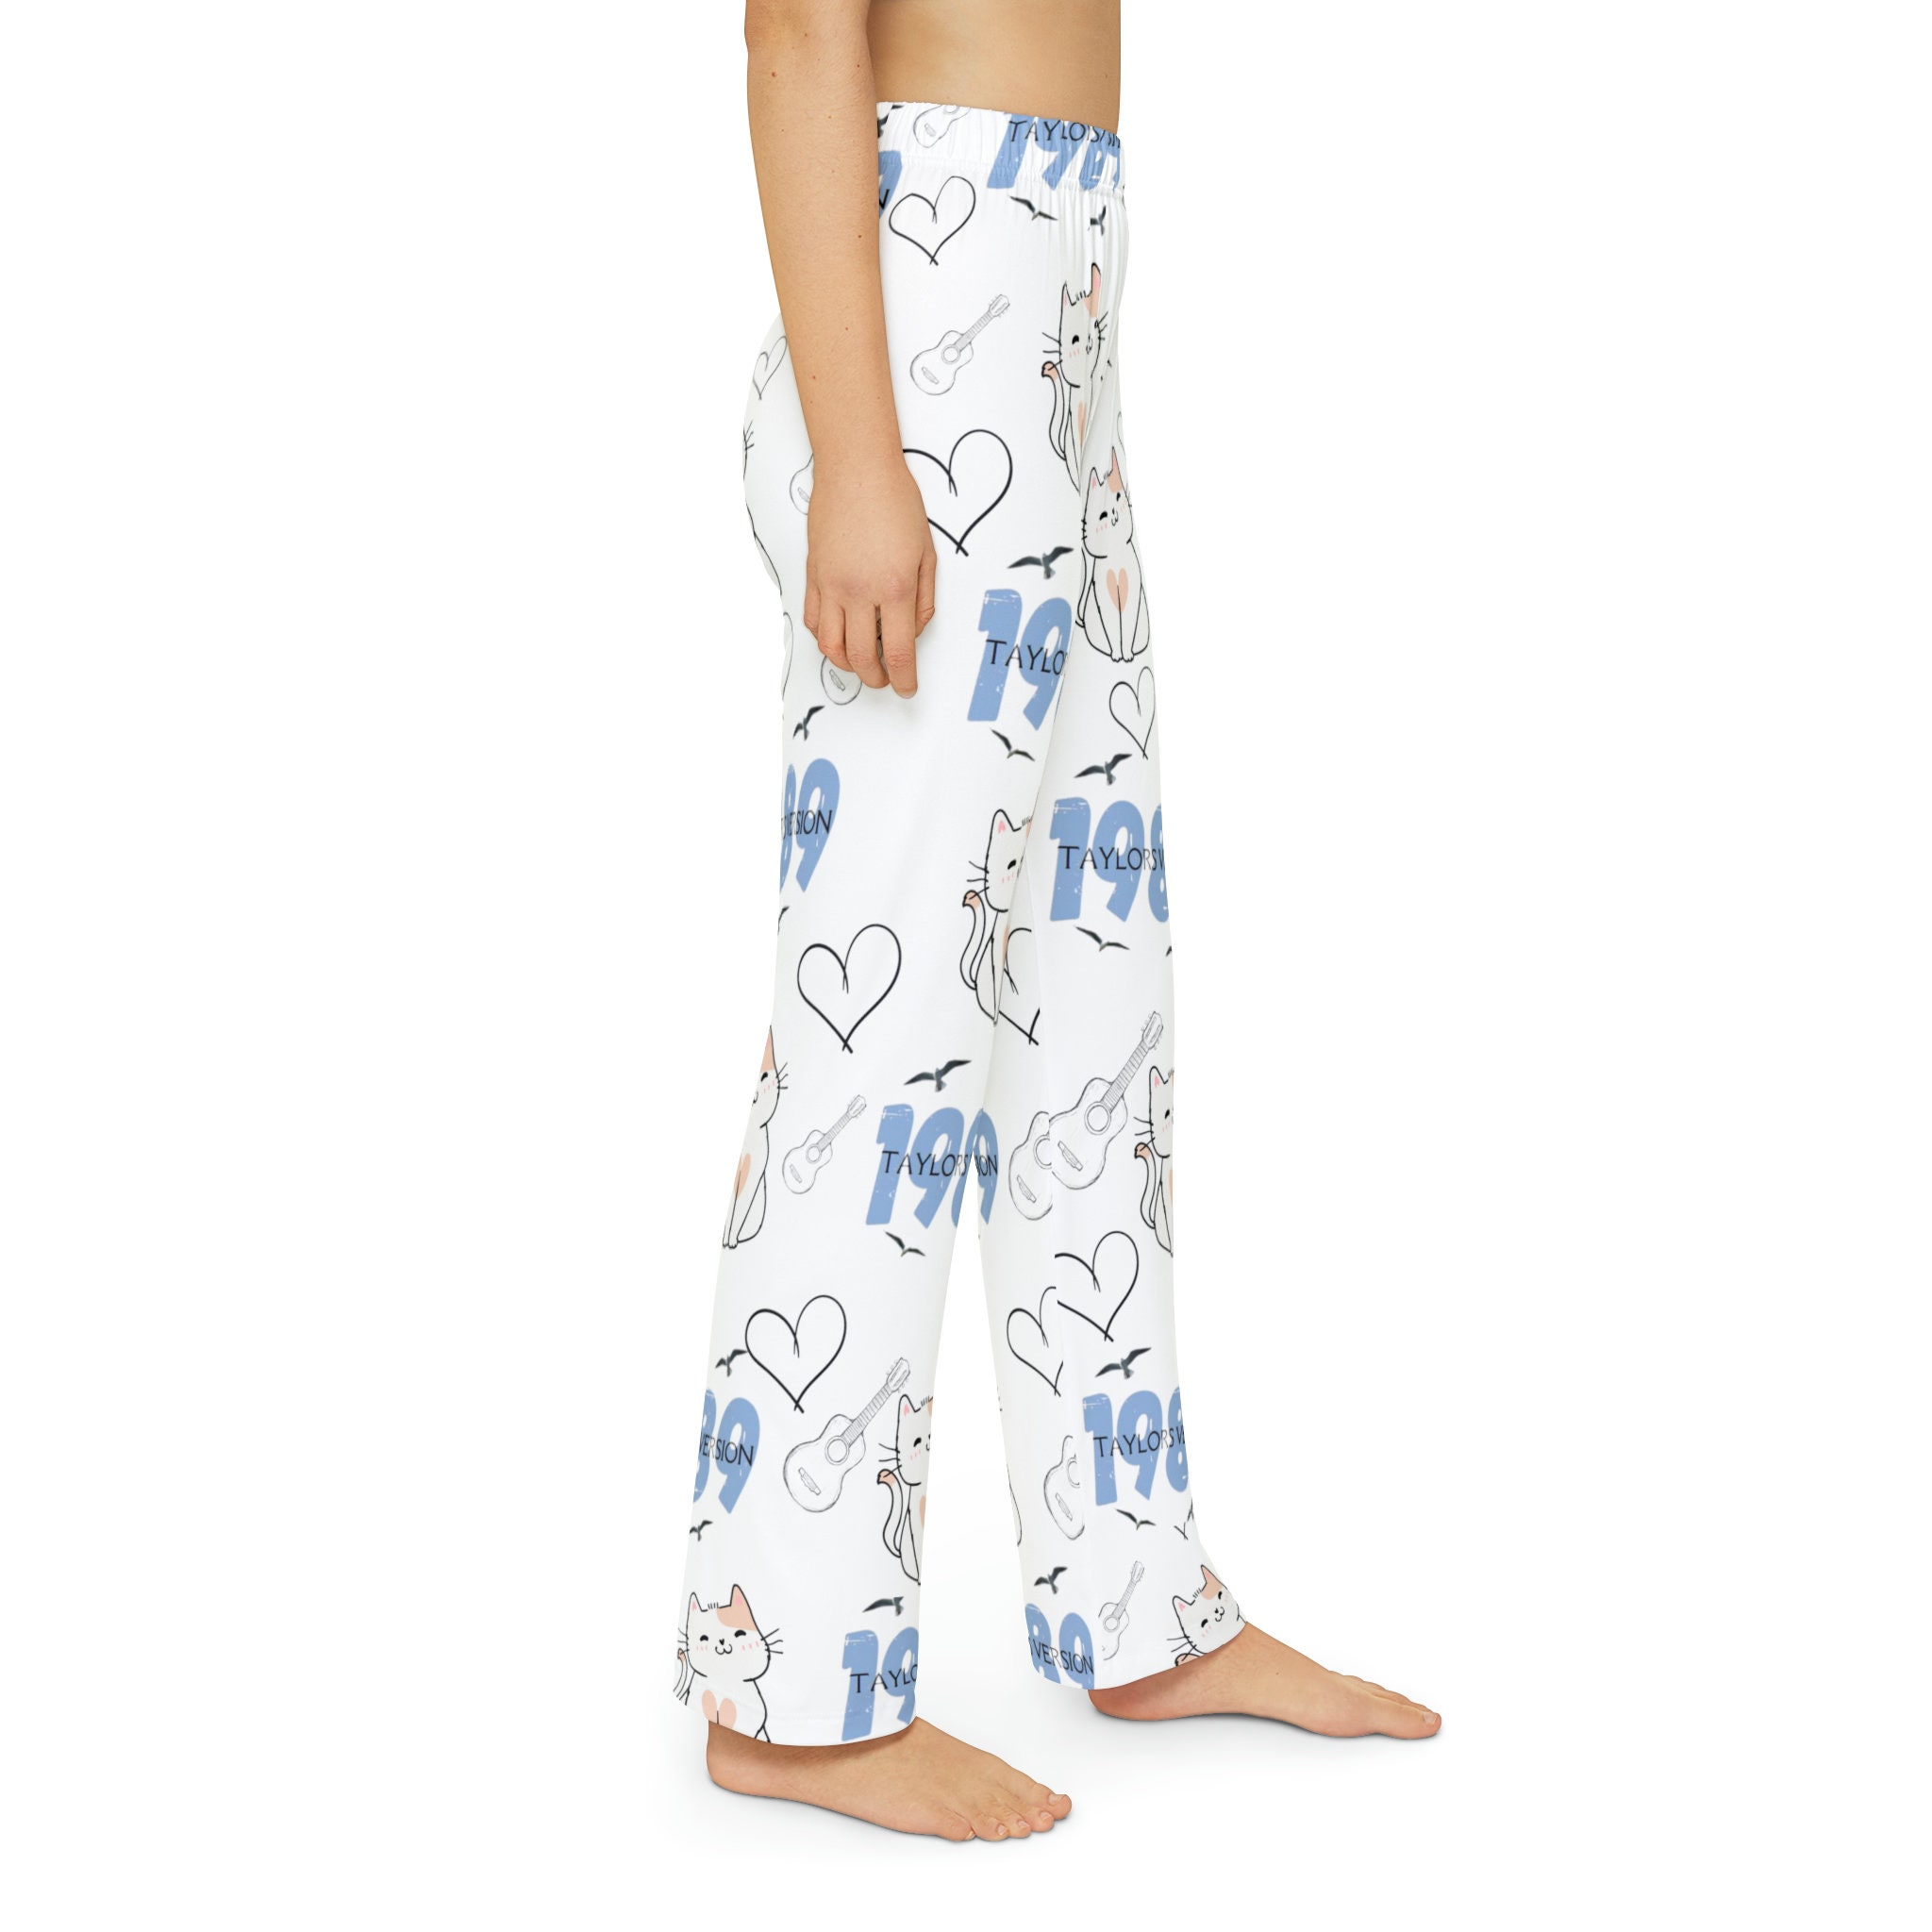 Taylor version Pajama Pants, Comfy Pajama Pants For swiftiee, Taylor Merch, Gift For Mother's day